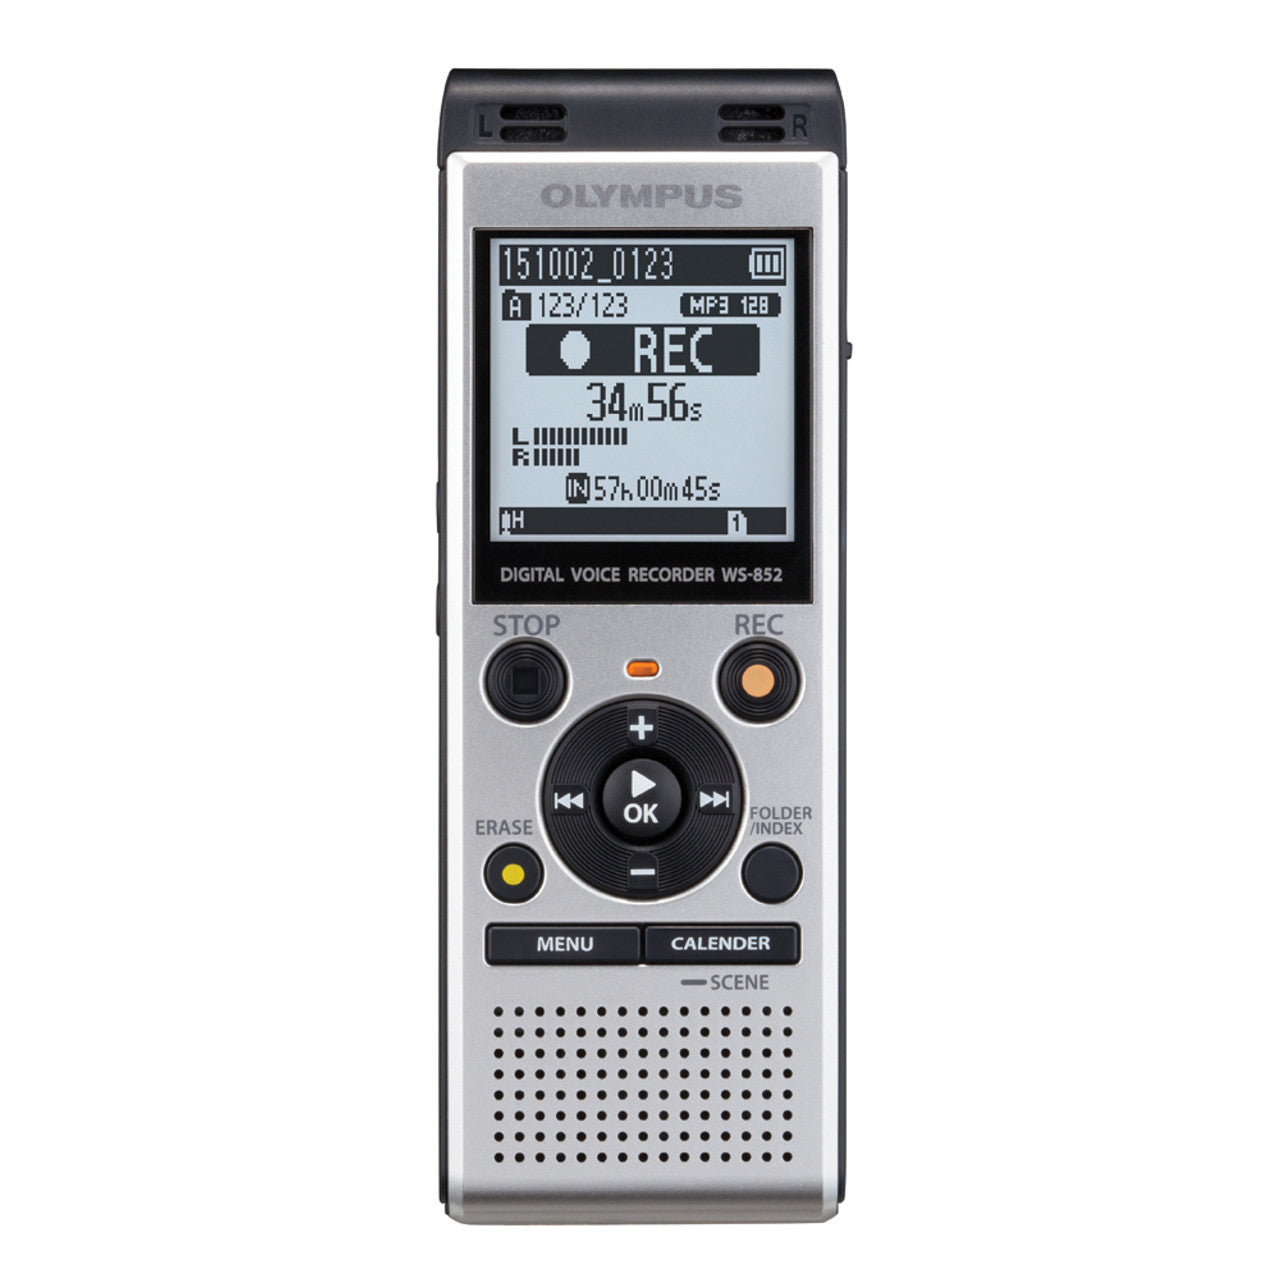 Digital Voice Recorder with PC by Olympus